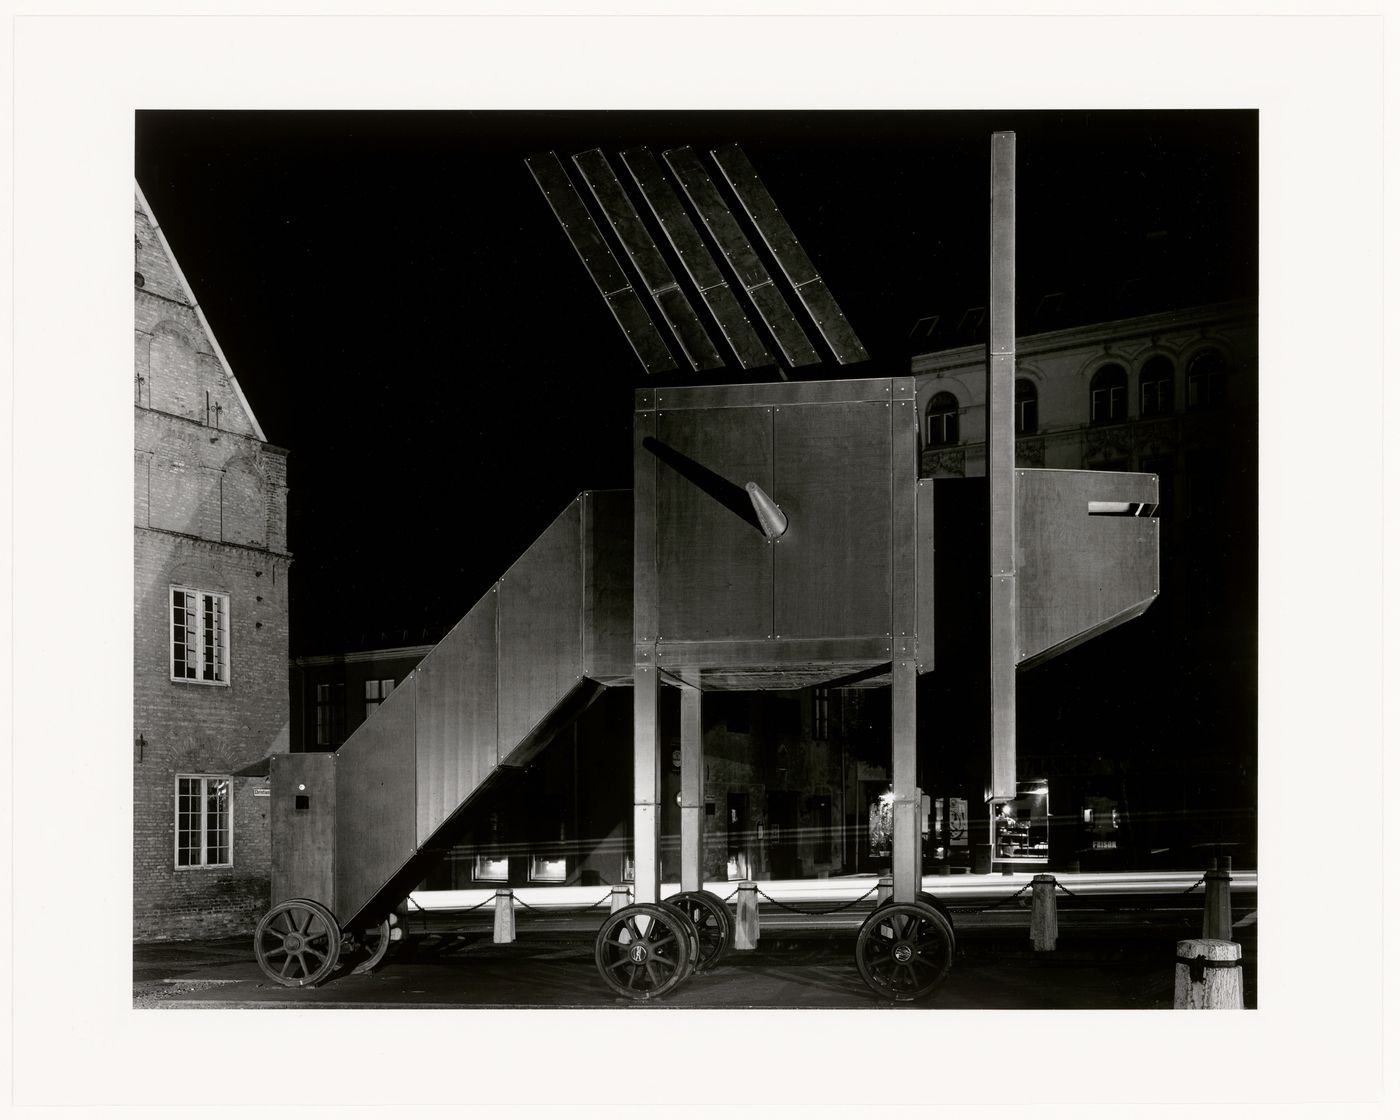 Security, from Victims, construction by John Hejduk, The Oslo School of Architecture, Oslo, Norway